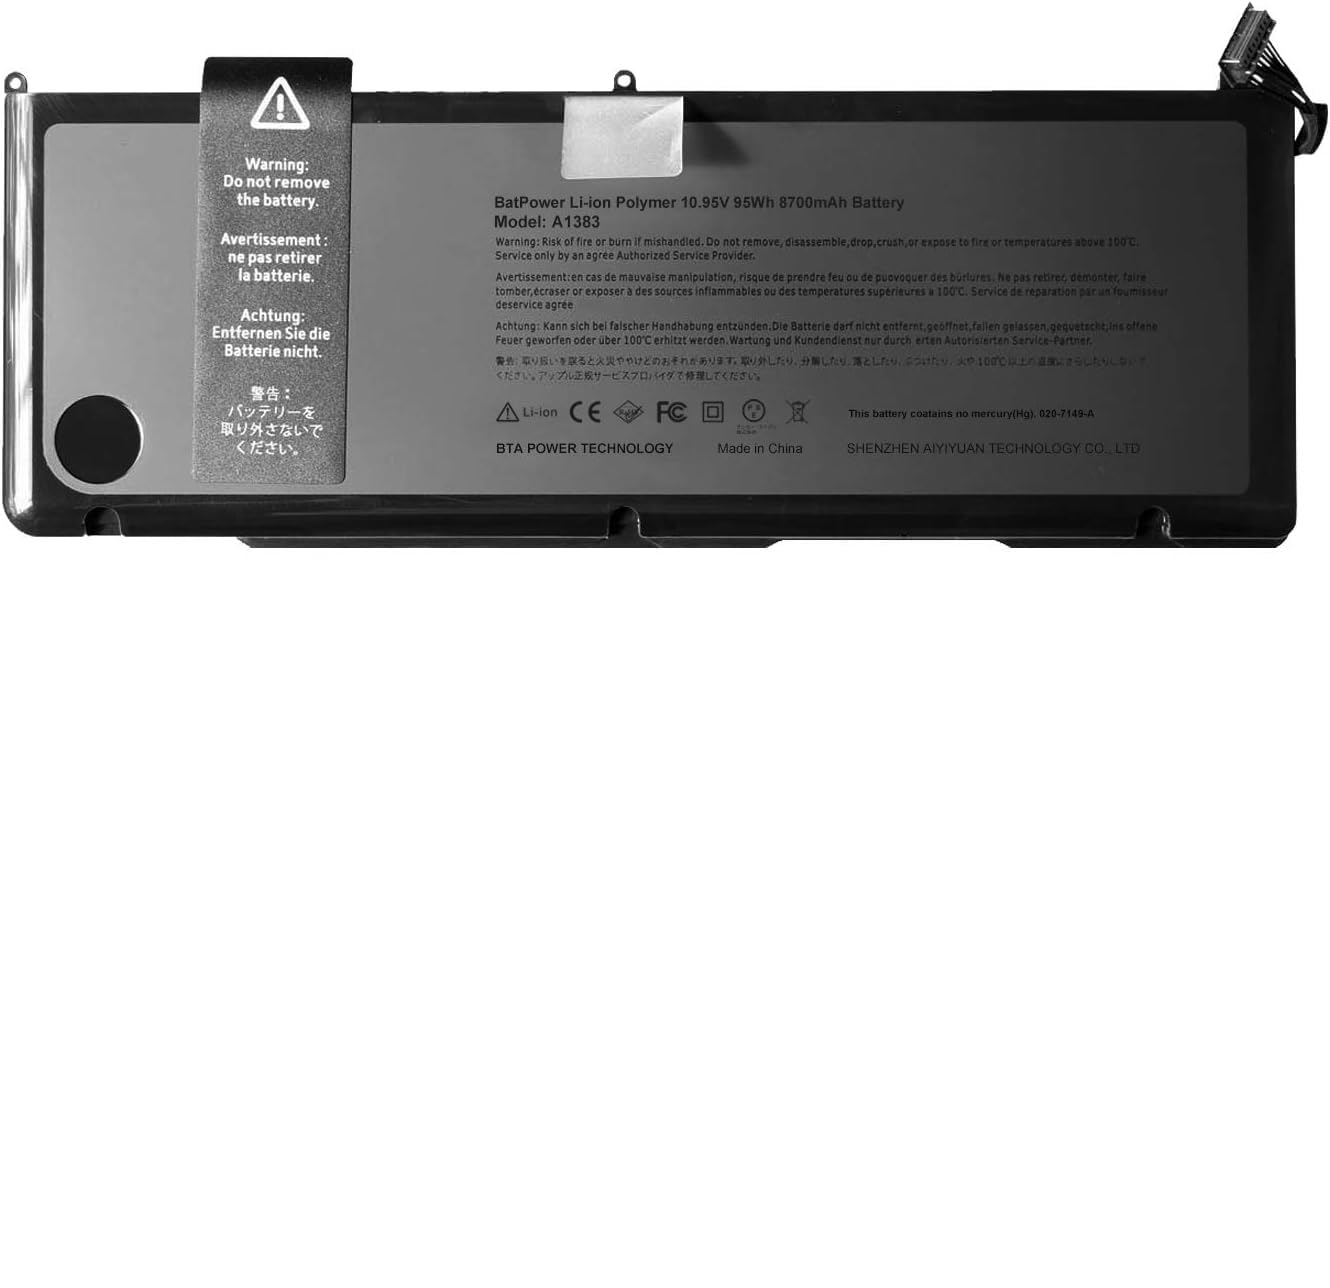 WISTAR A1383 Laptop Battery Compatible with MacBook Pro 17" 2011 Version A1279